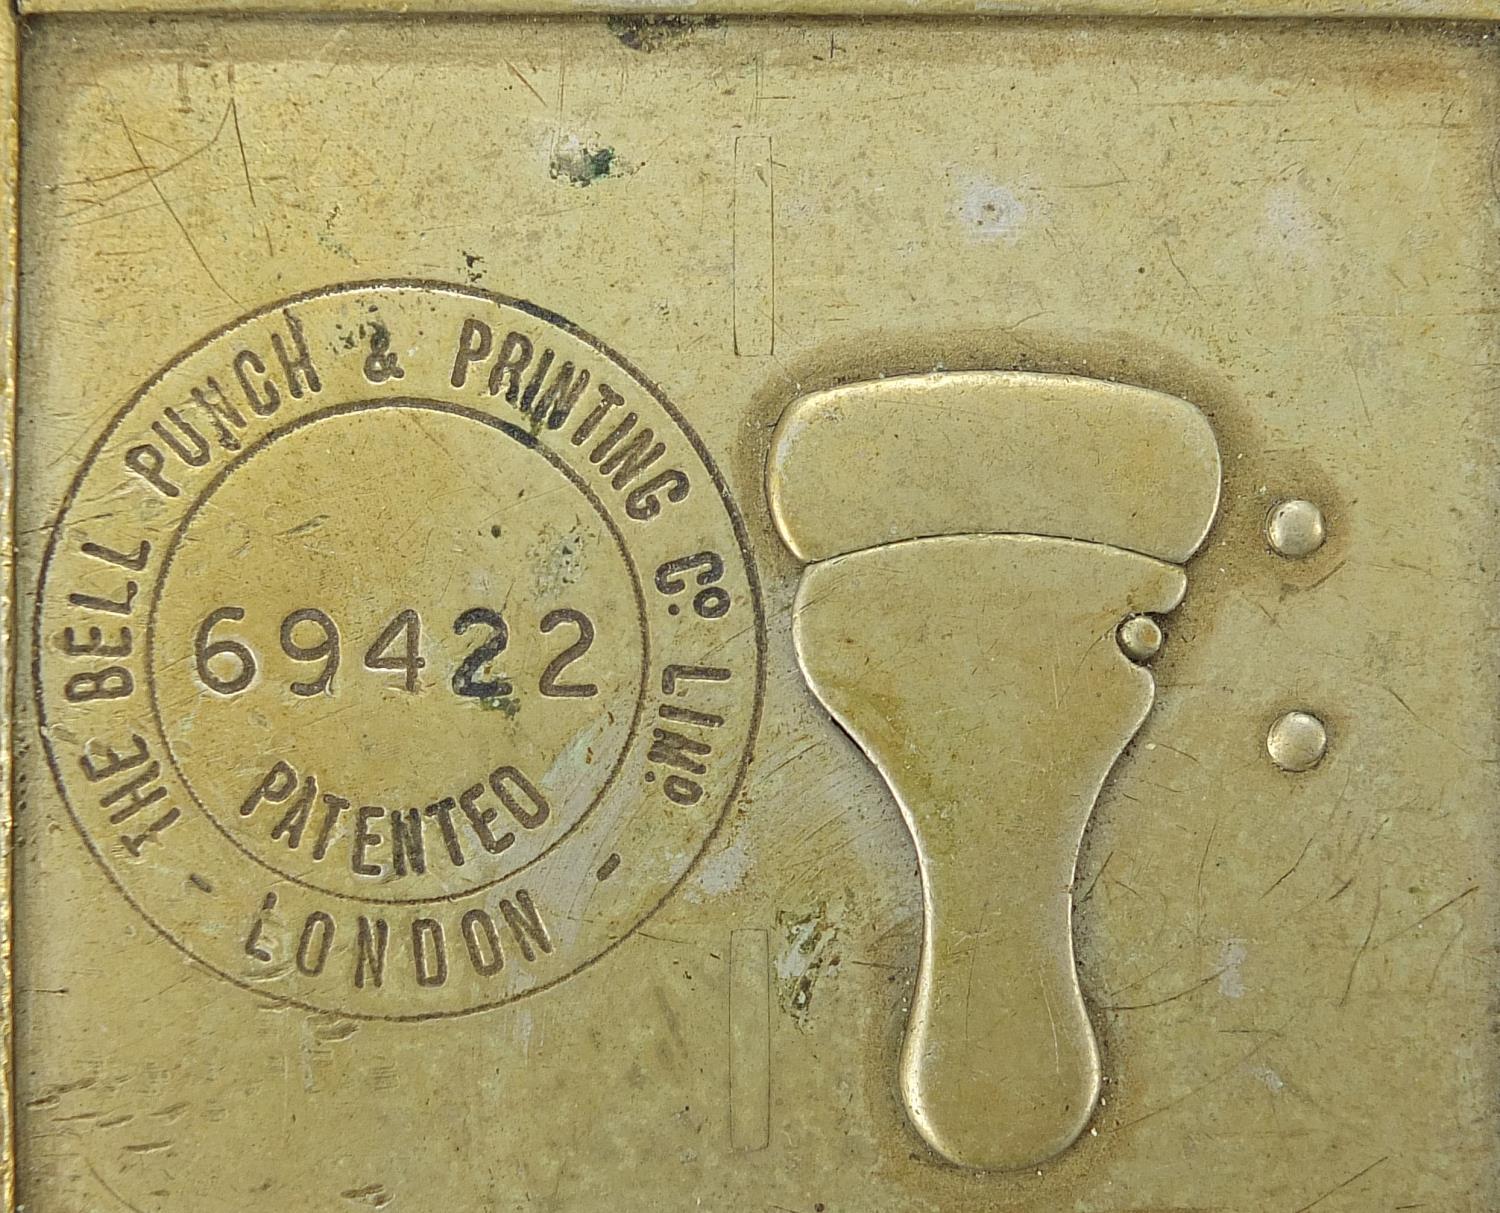 Bell Punch & Printing Co bus ticket machine numbered 69422, 16cm high - Image 4 of 4